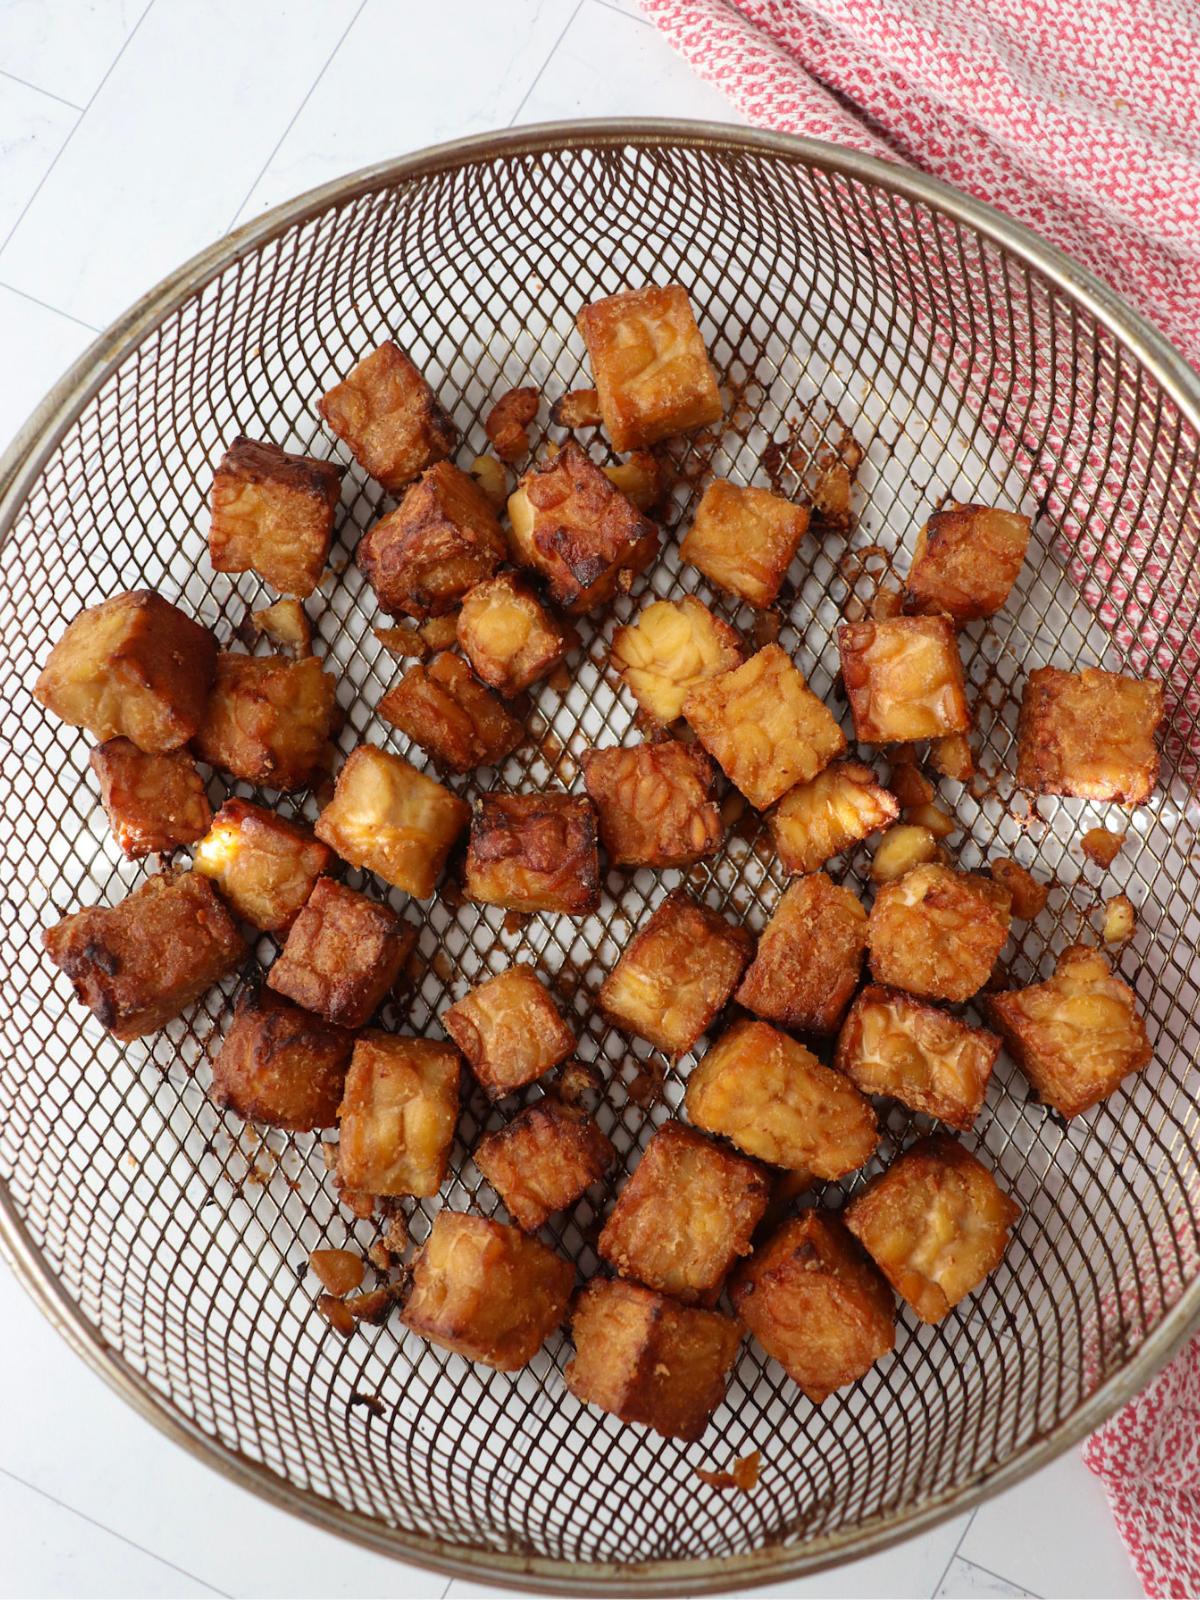 Marinated and air fried tempeh cubes in an air fryer basket on a kitchen counter next to a red kitchen towel.